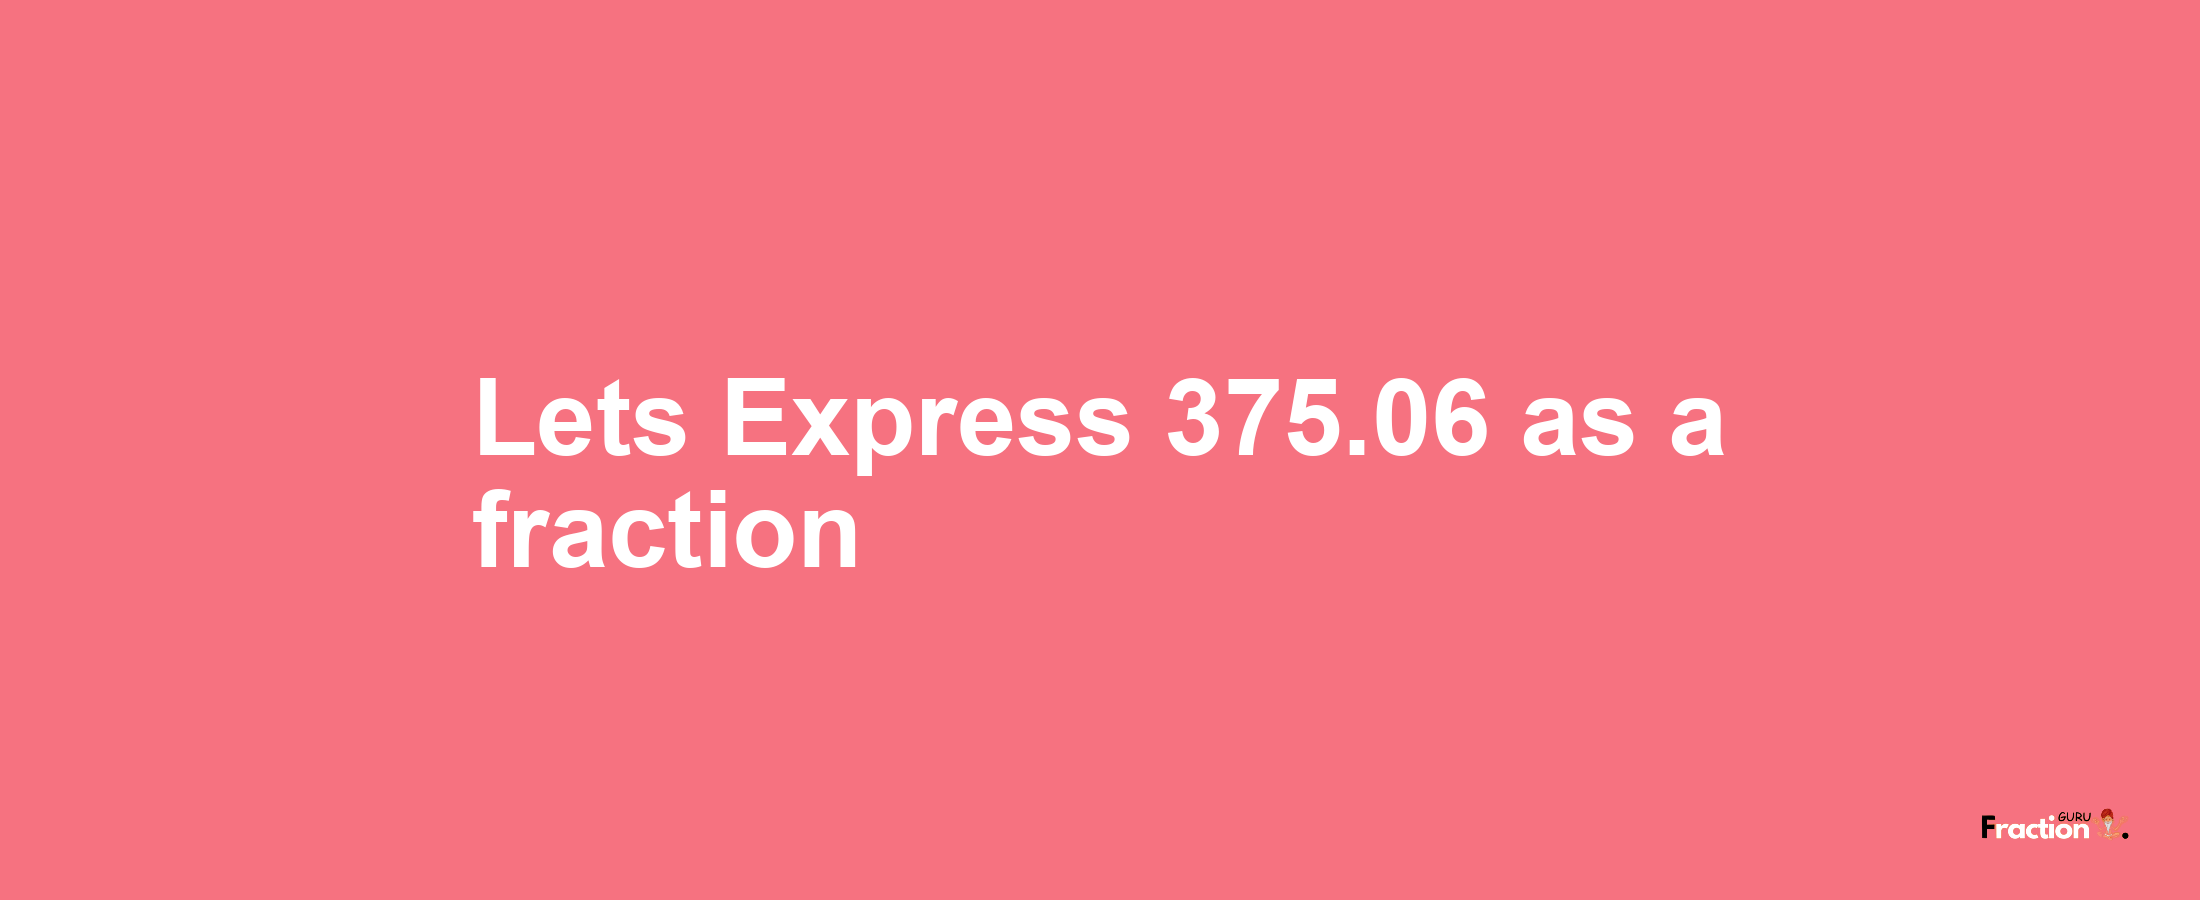 Lets Express 375.06 as afraction